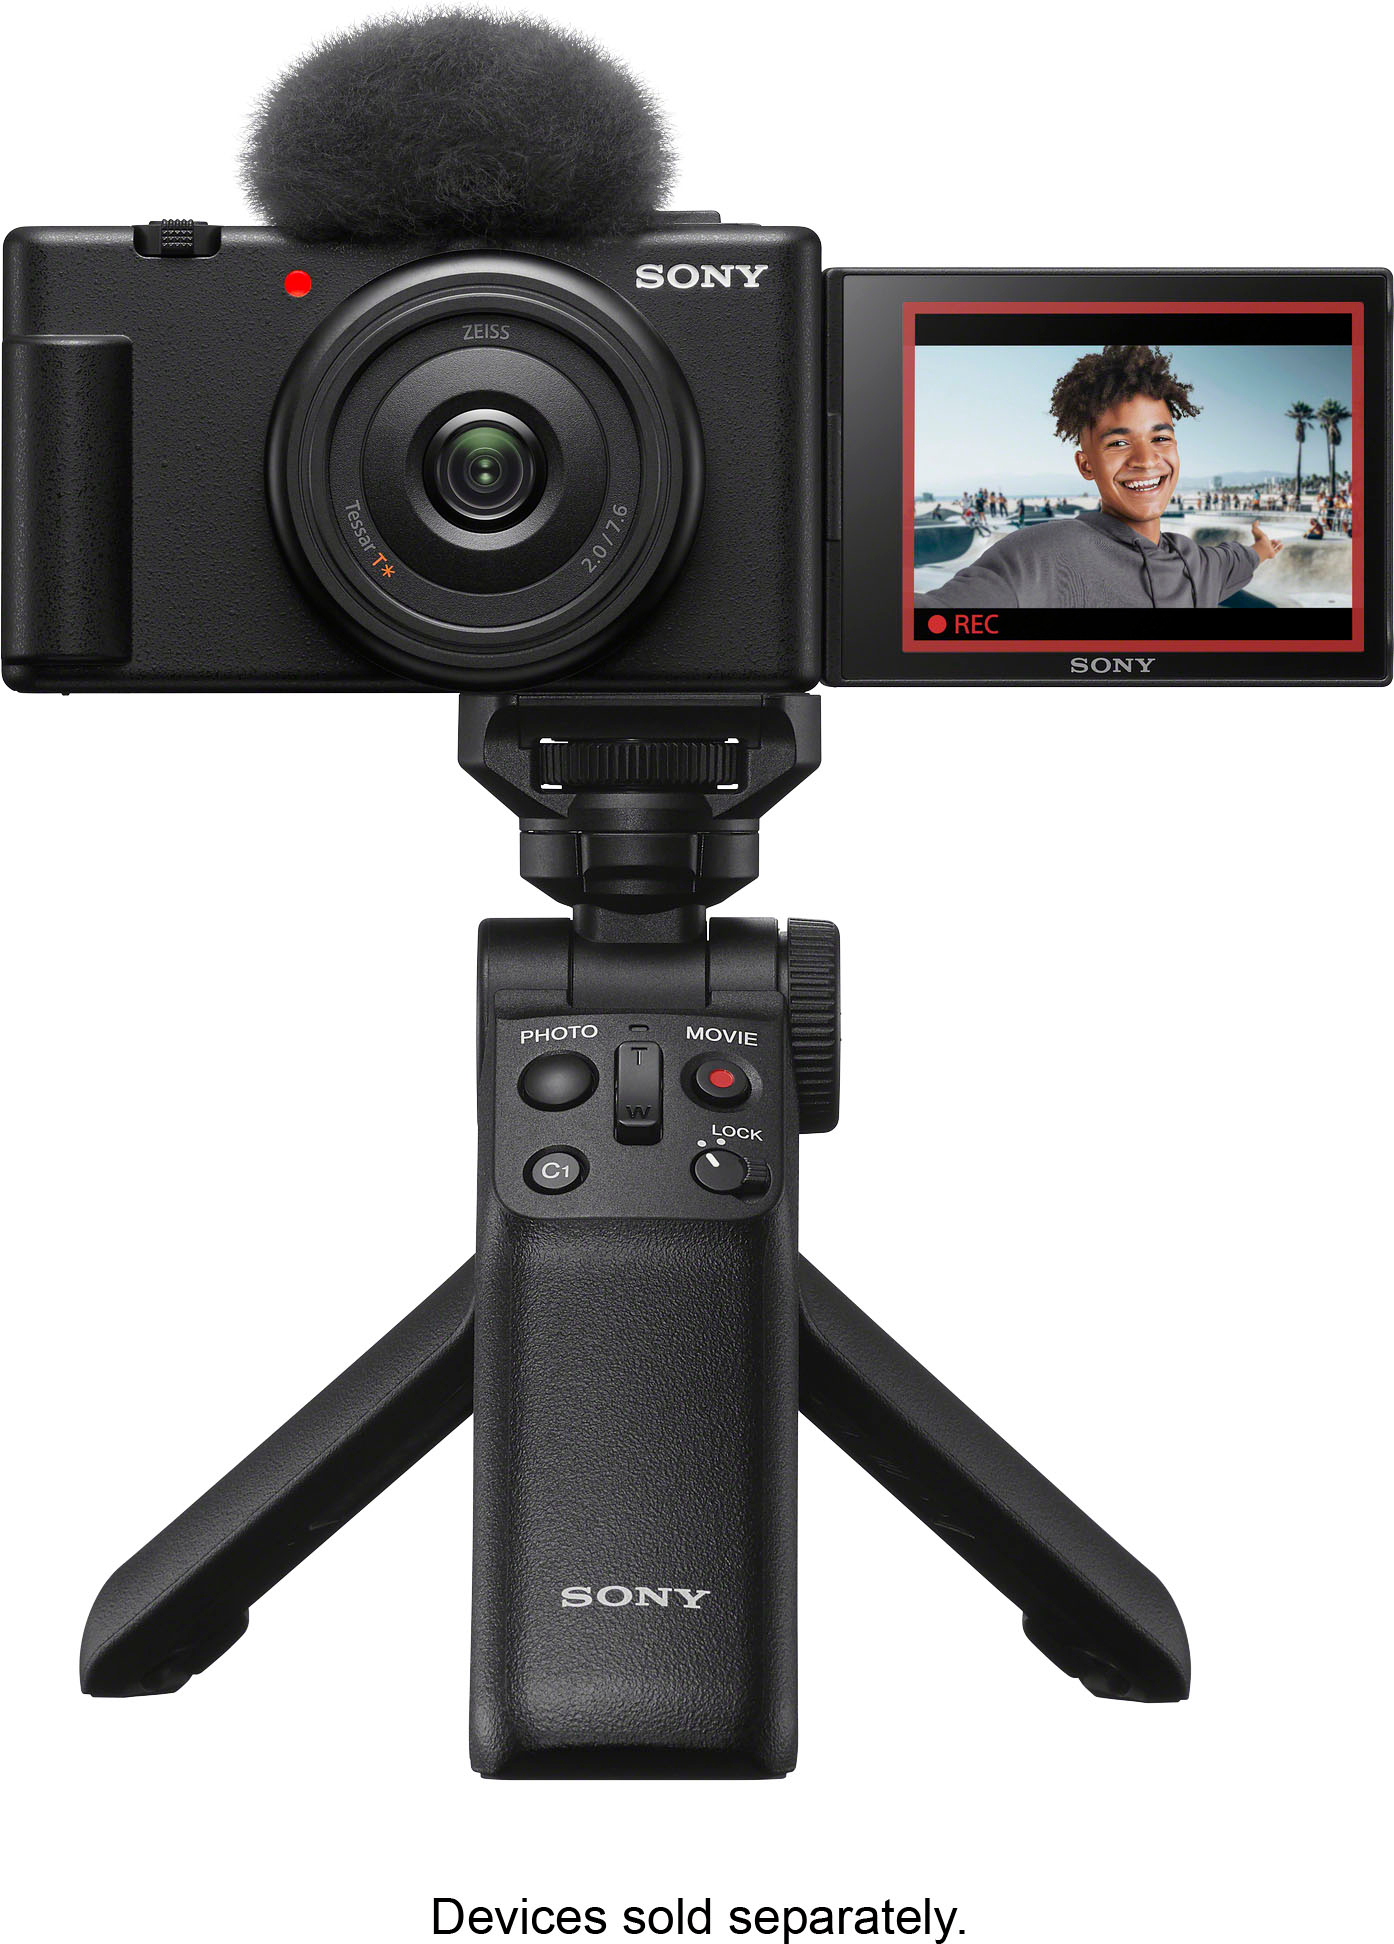 Questions and Answers: Sony ZV-1F Vlog Camera for Content Creators and